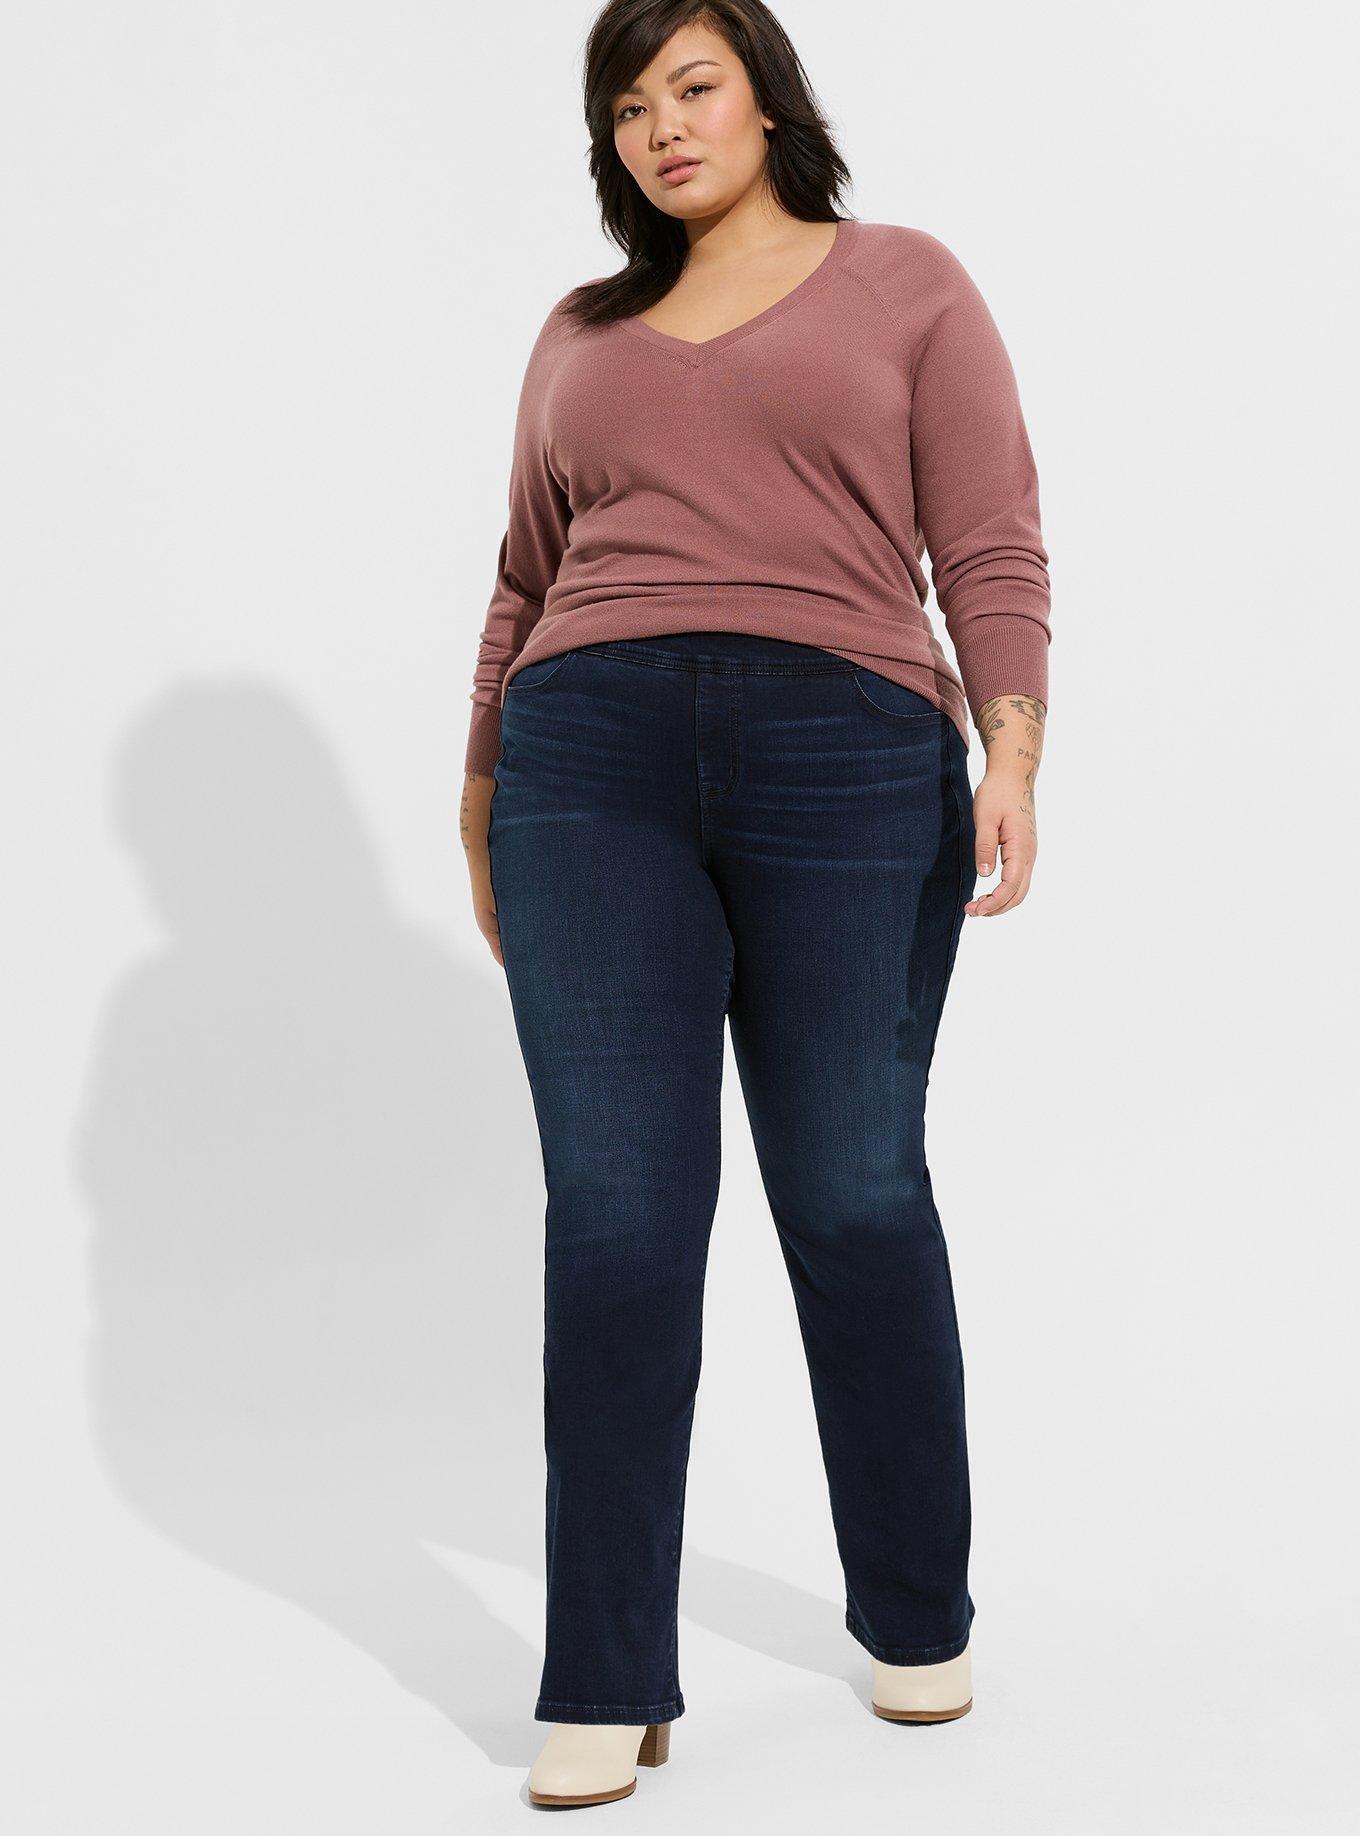 best plus size jeans to hide fupa - Buy best plus size jeans to